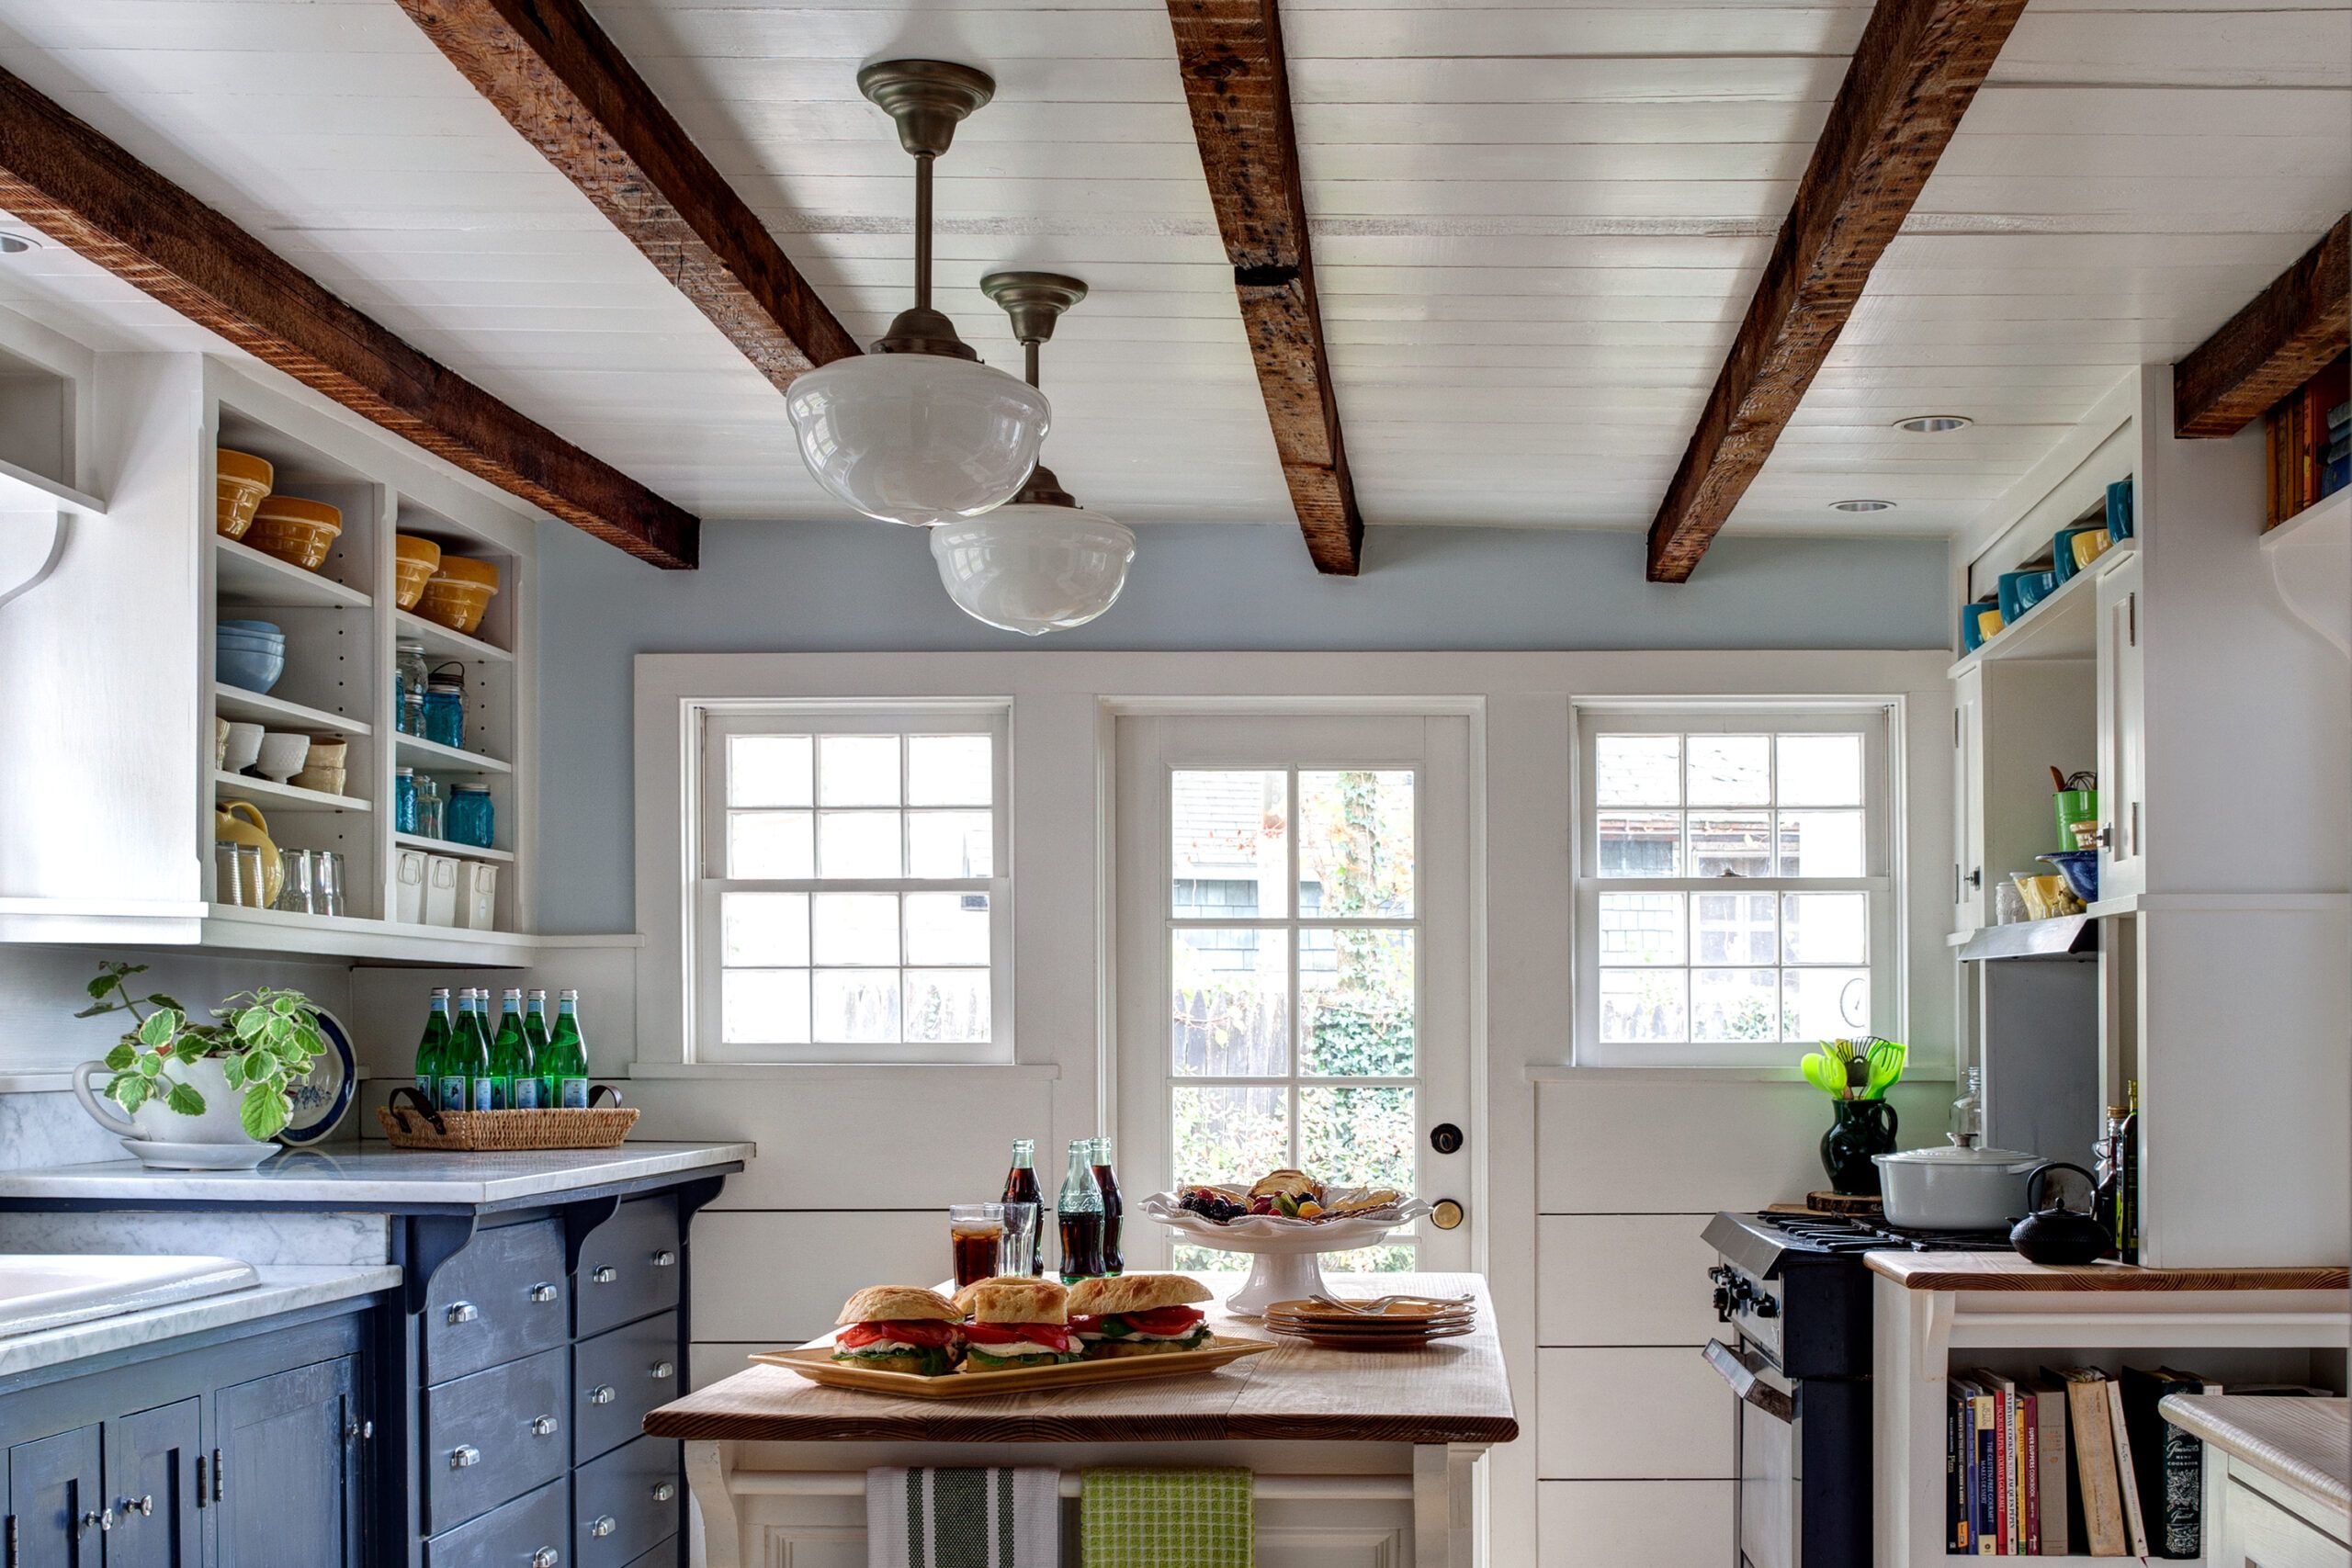 How to Decorate Your Ceiling with Faux Wood Beams